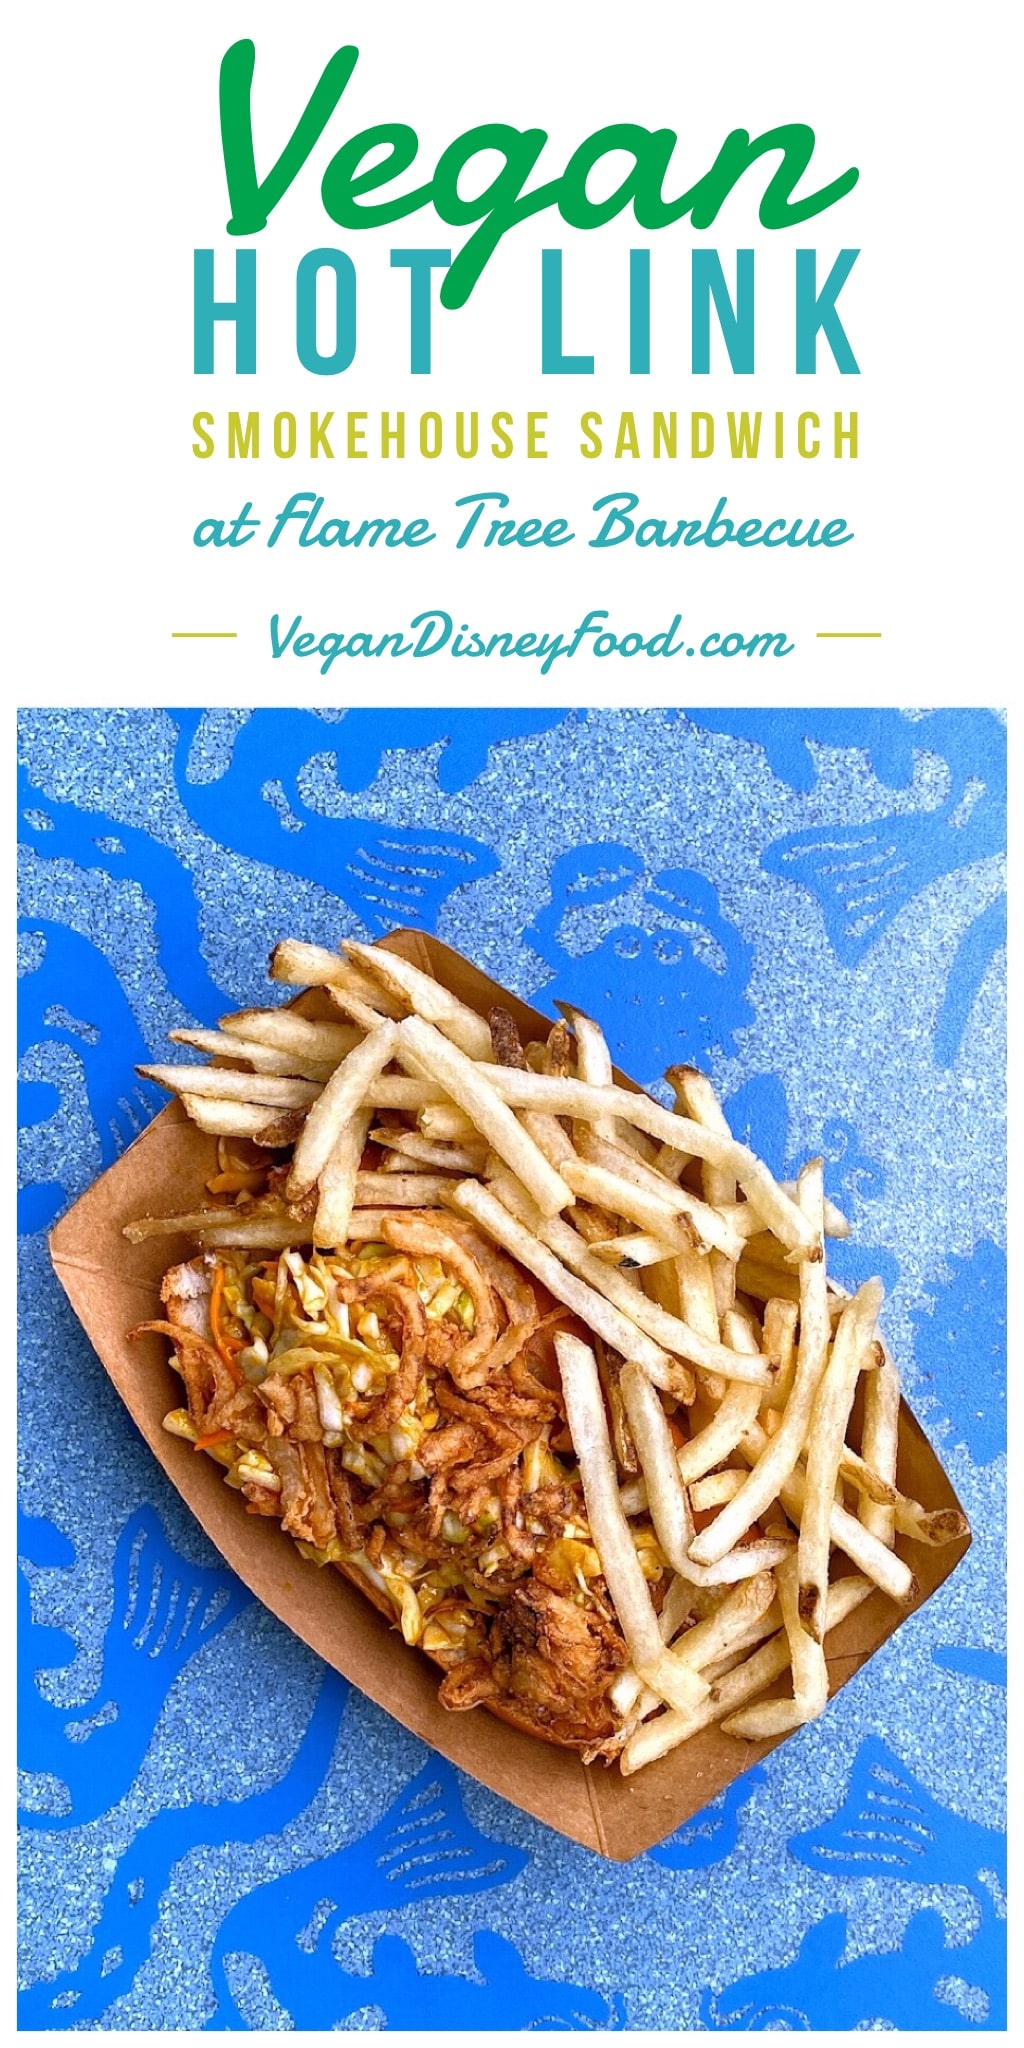 Vegan Hot Link Smokehouse Sandwich at Flame Tree Barbecue in Disney